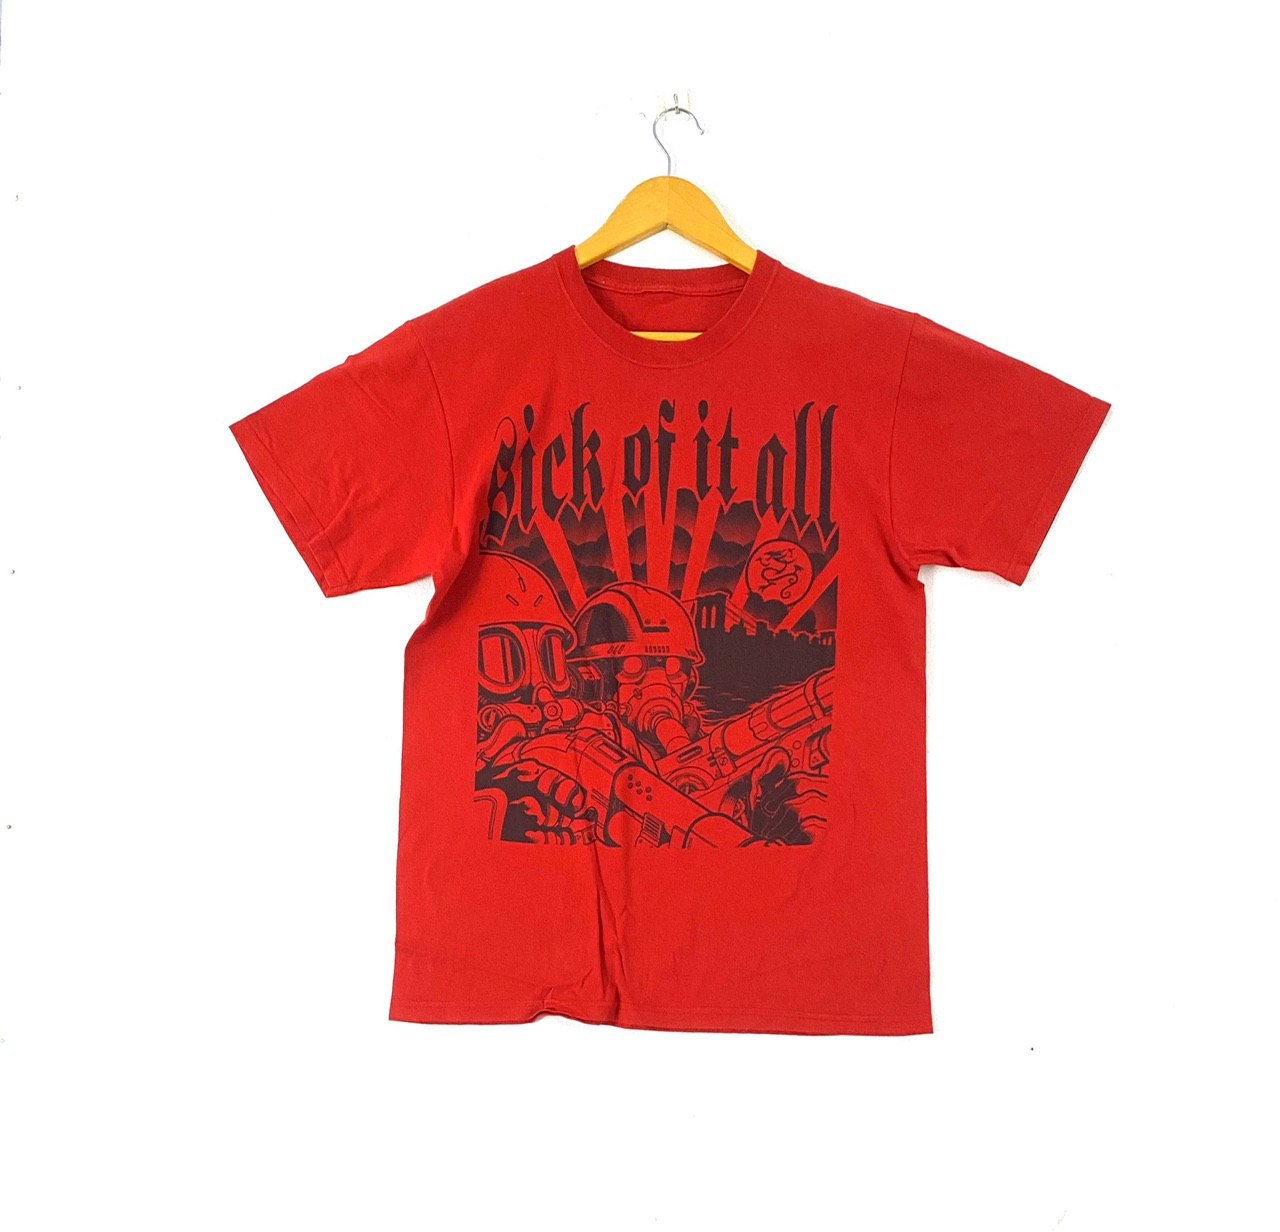 Vintage 90s Sick of It All One World One Law Album Tour - Etsy